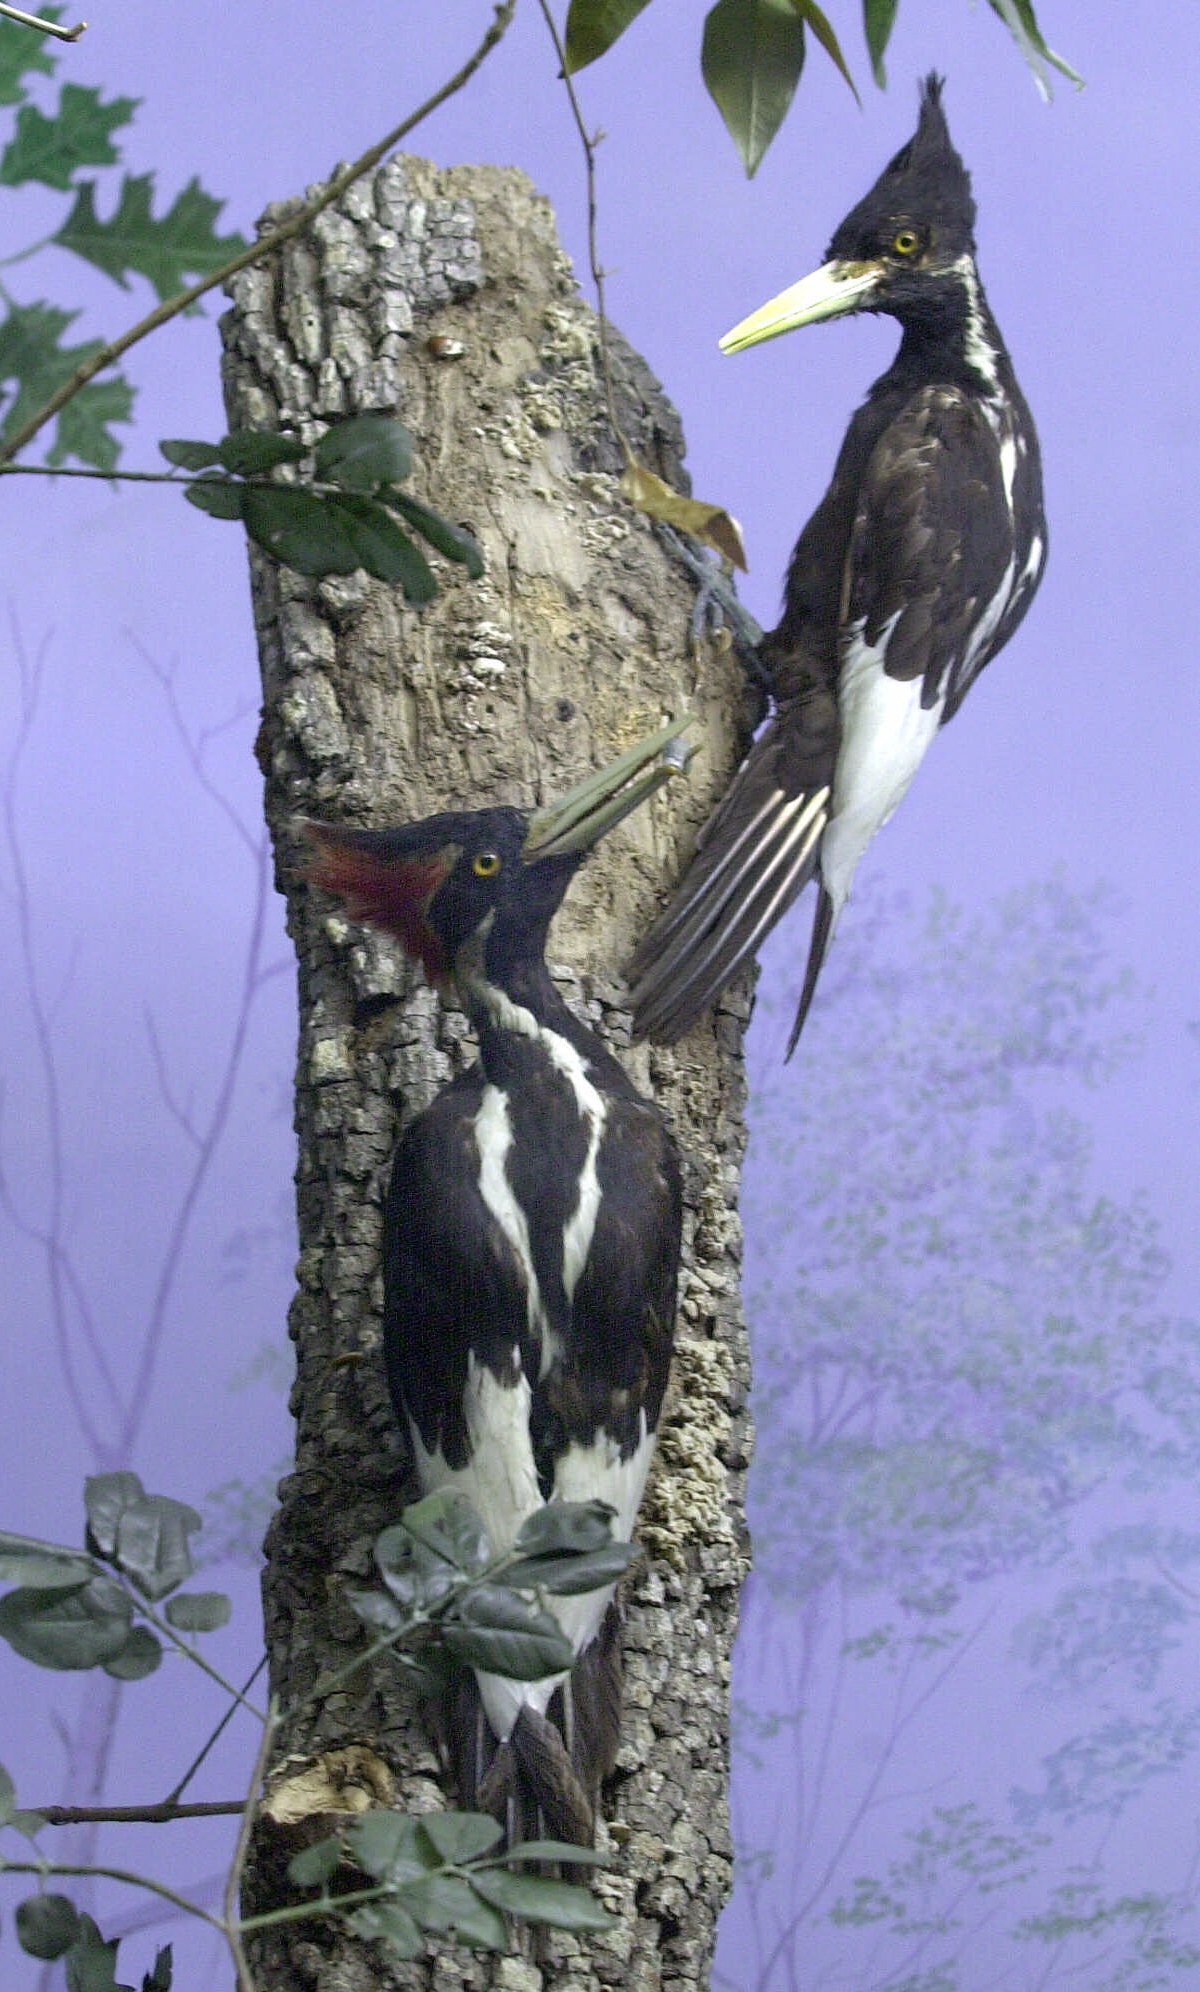 Do videos show ivory-billed woodpecker, or is it extinct?